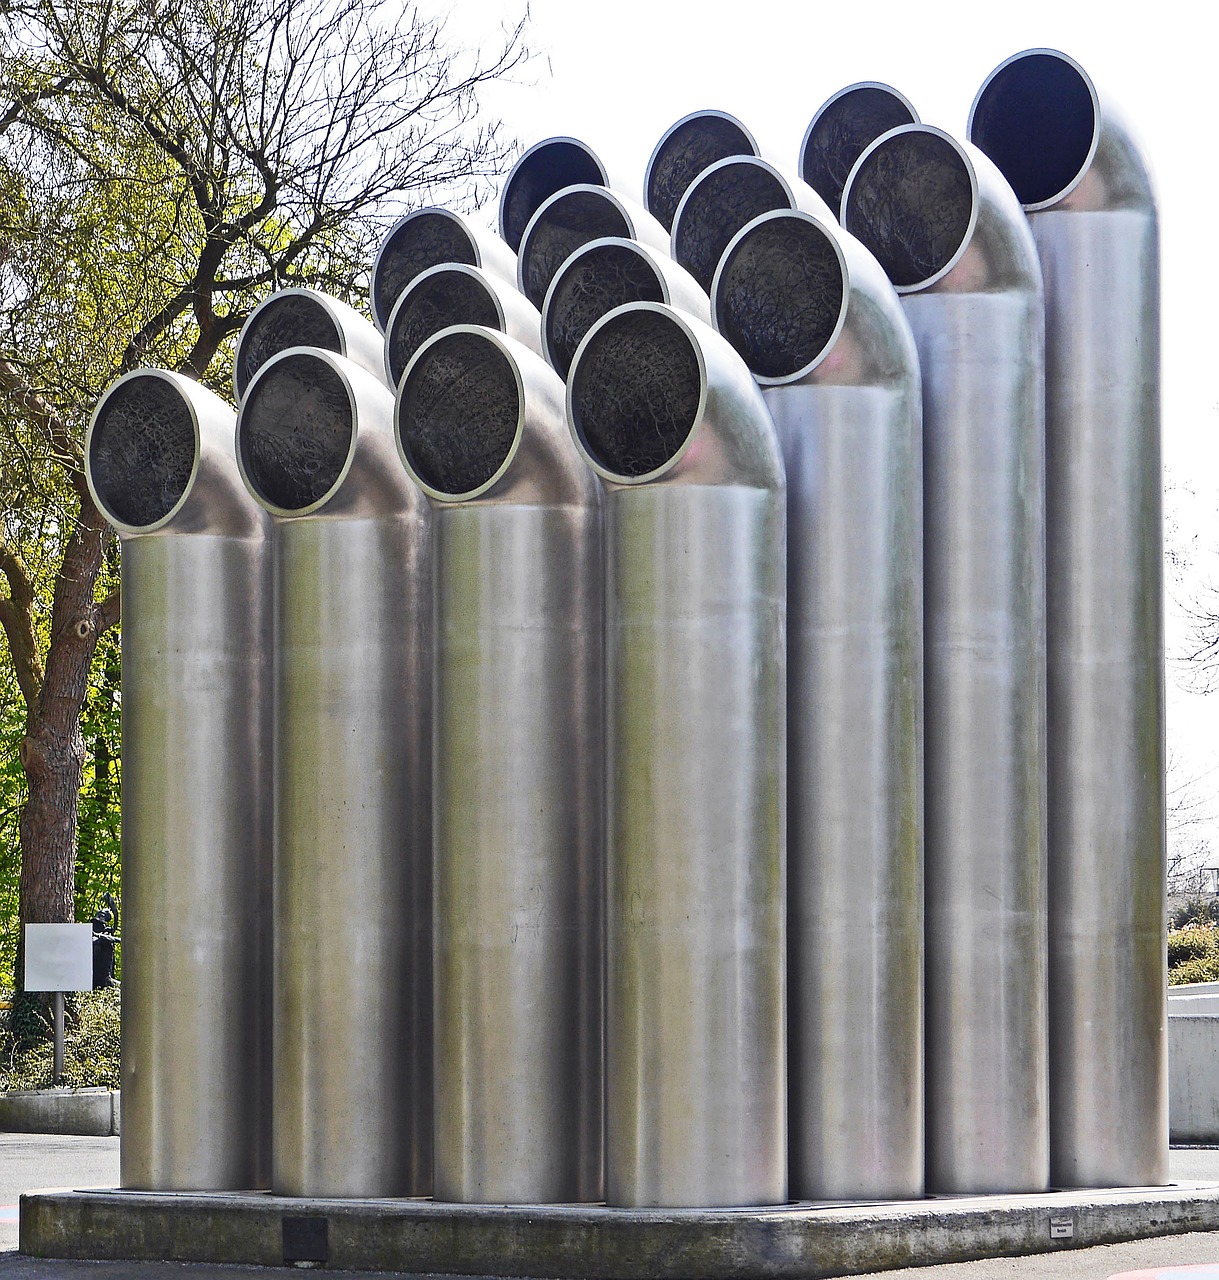 tube sculpture art most construction stainless steel free photo